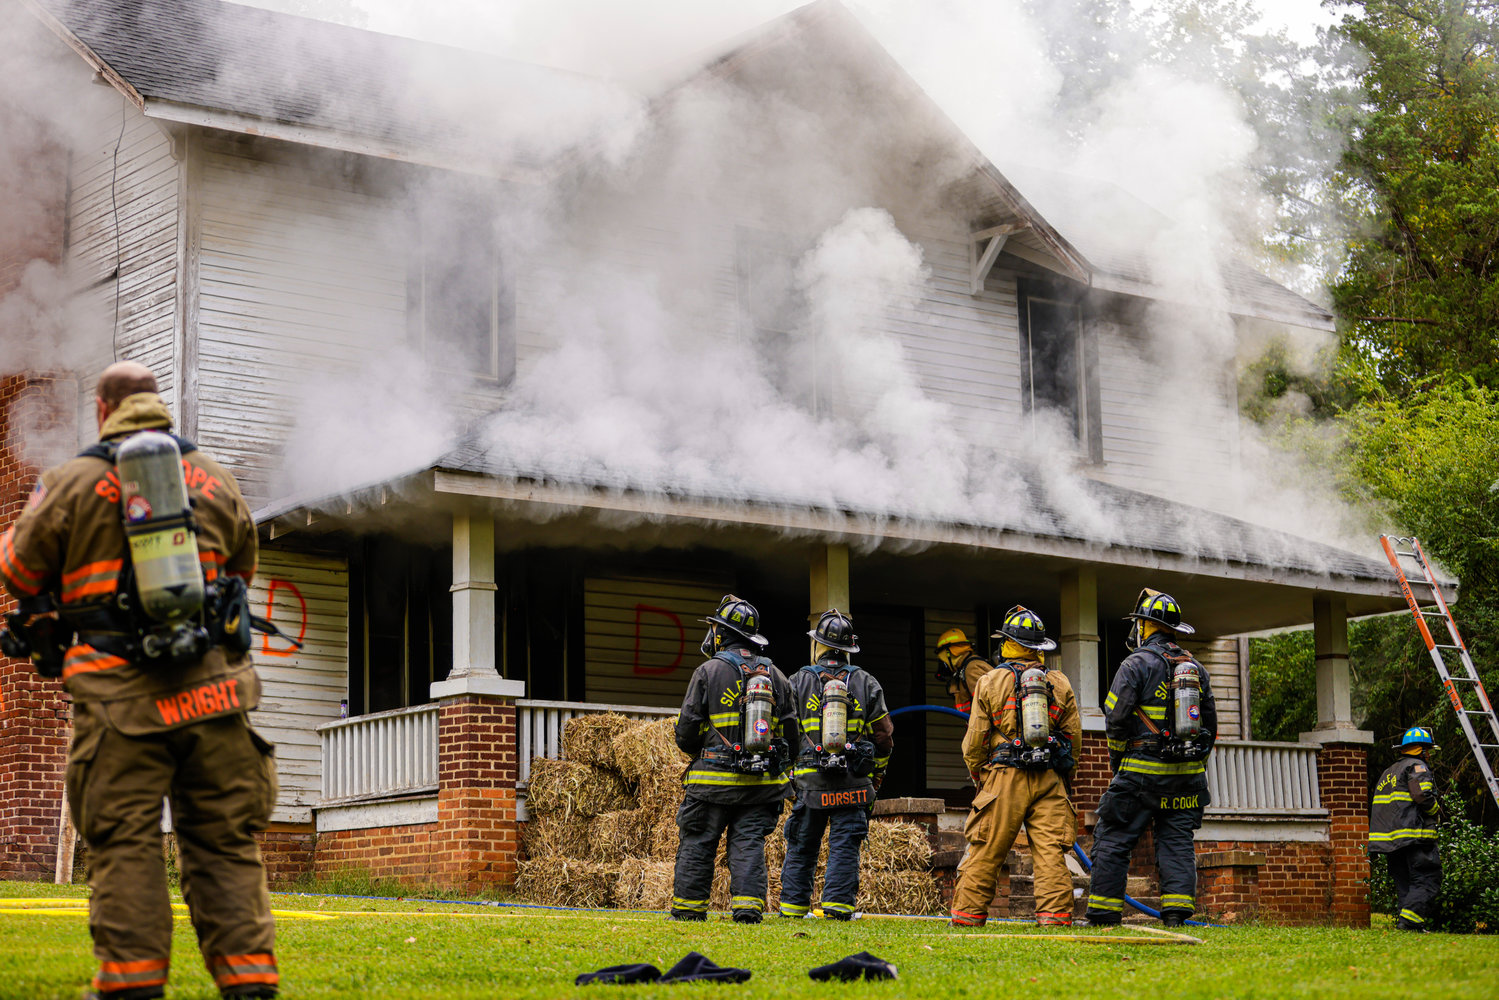 Smoke billows from the home on Alston Road, as firefighters from different departments across the county wait to enter the Siler City house used for the live burn.